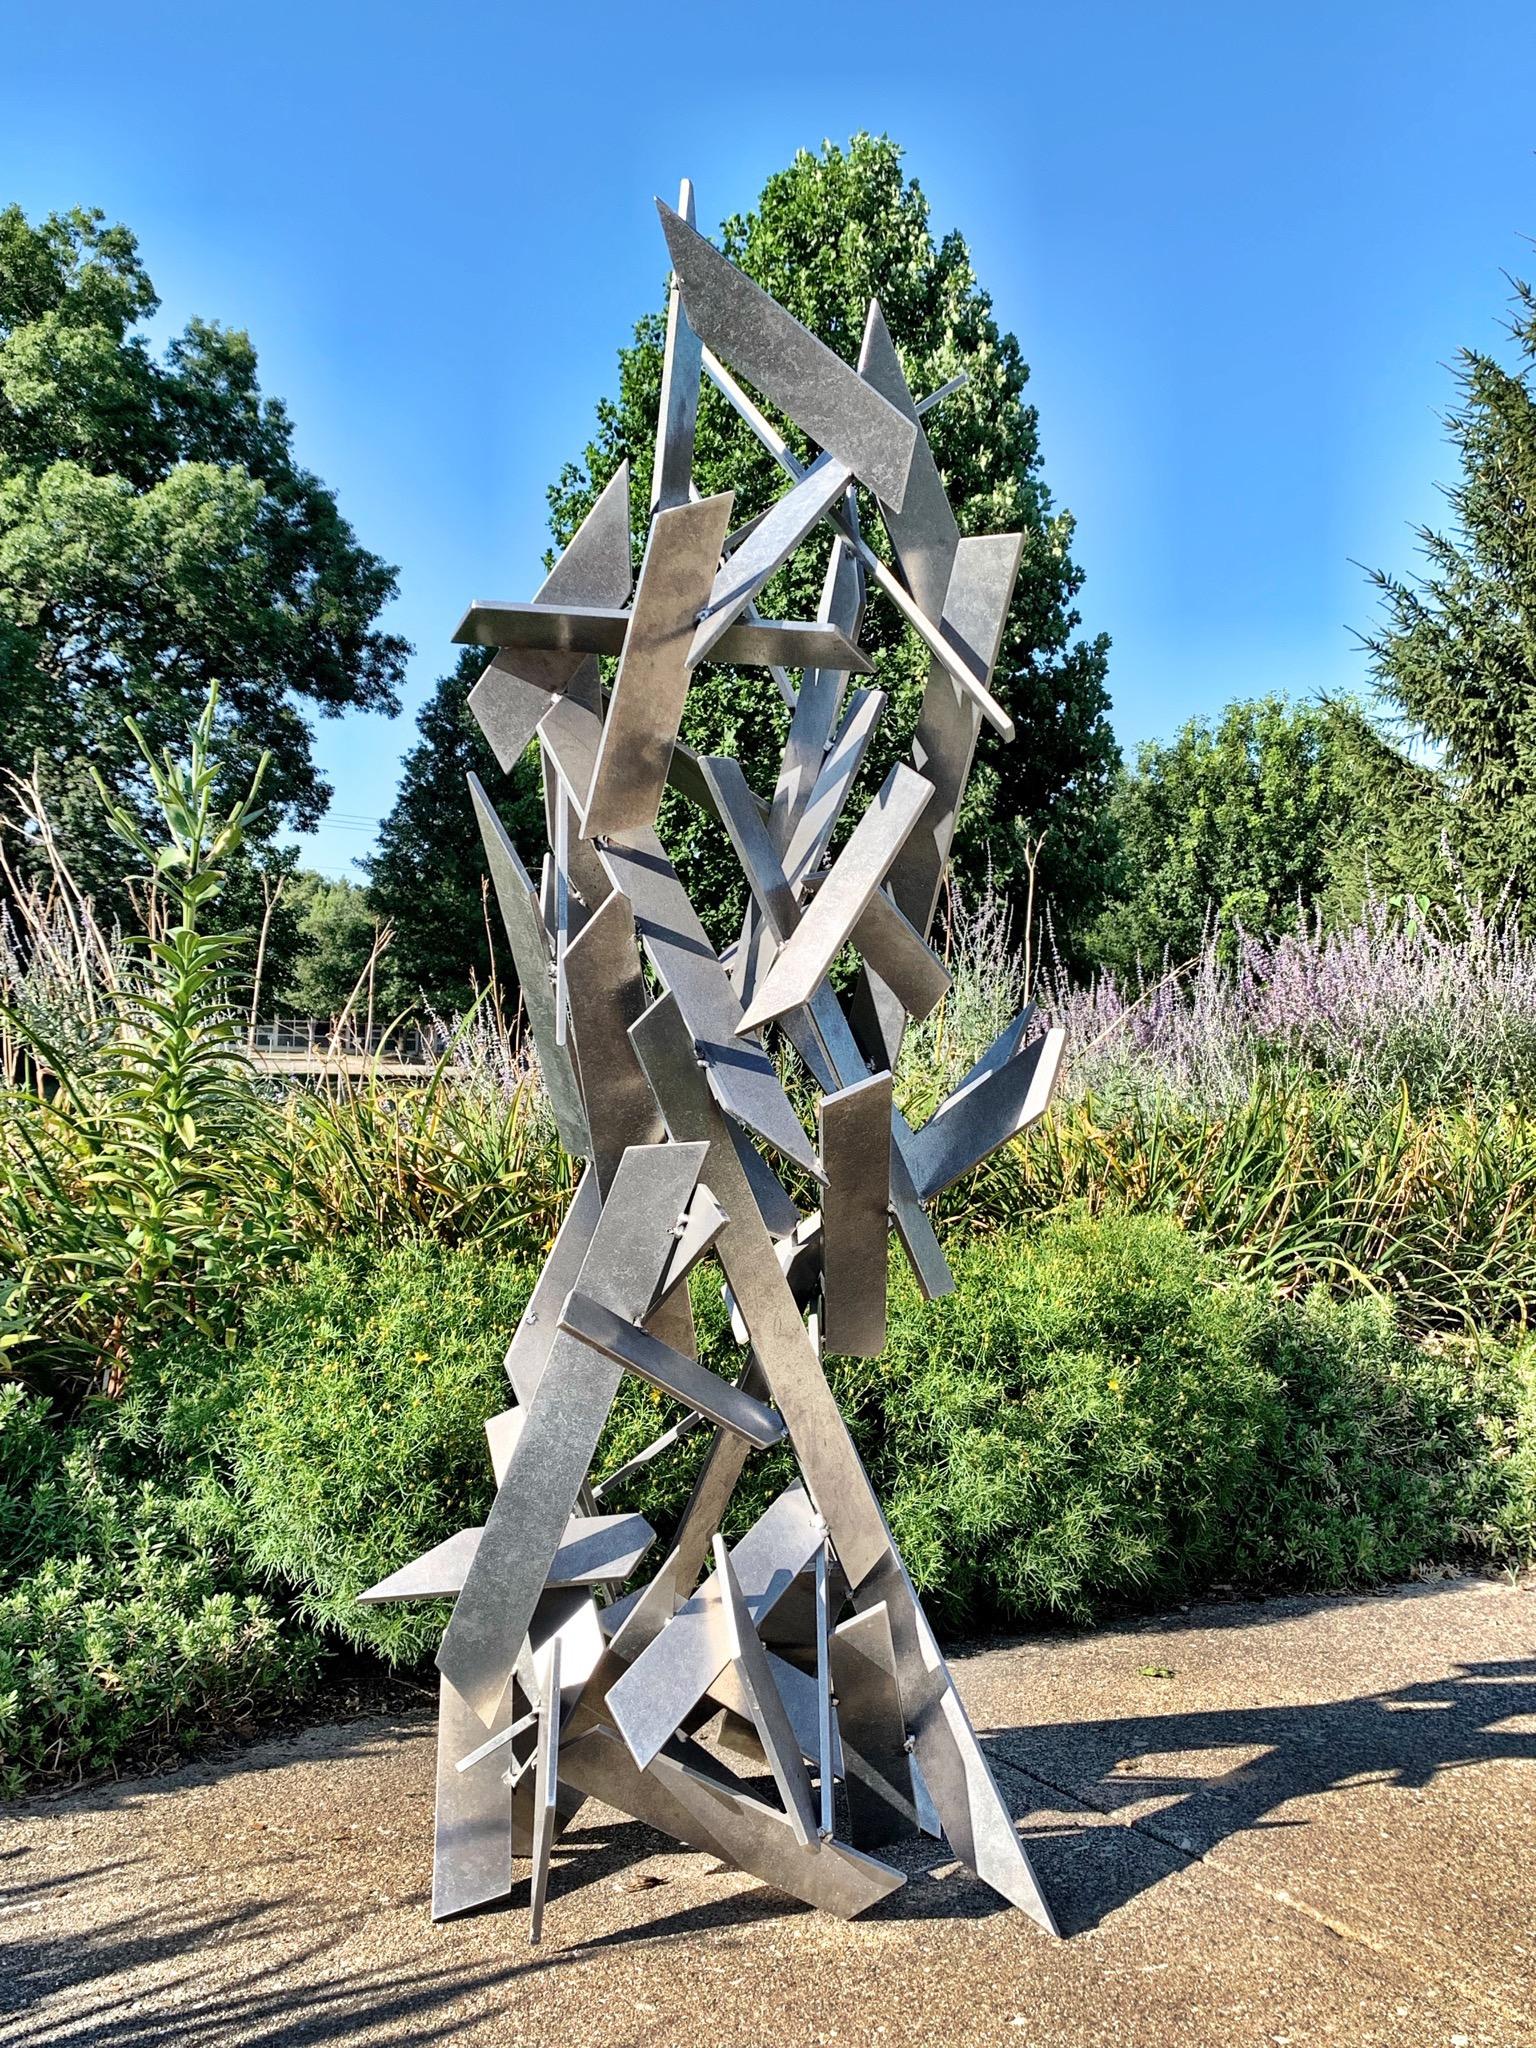 TITLE: Hysteria 
ARTIST: Sebastian R.

DIMENSIONS
H 66 in. x W 24 in. x D 24 in.
H 167.64 cm x W 60.96 cm x D 60.96 cm

DESCRIPTION:
Hysteria is a welded metal sculpture made from abrasively tumbled pieces of thick aerospace grade aluminum. This